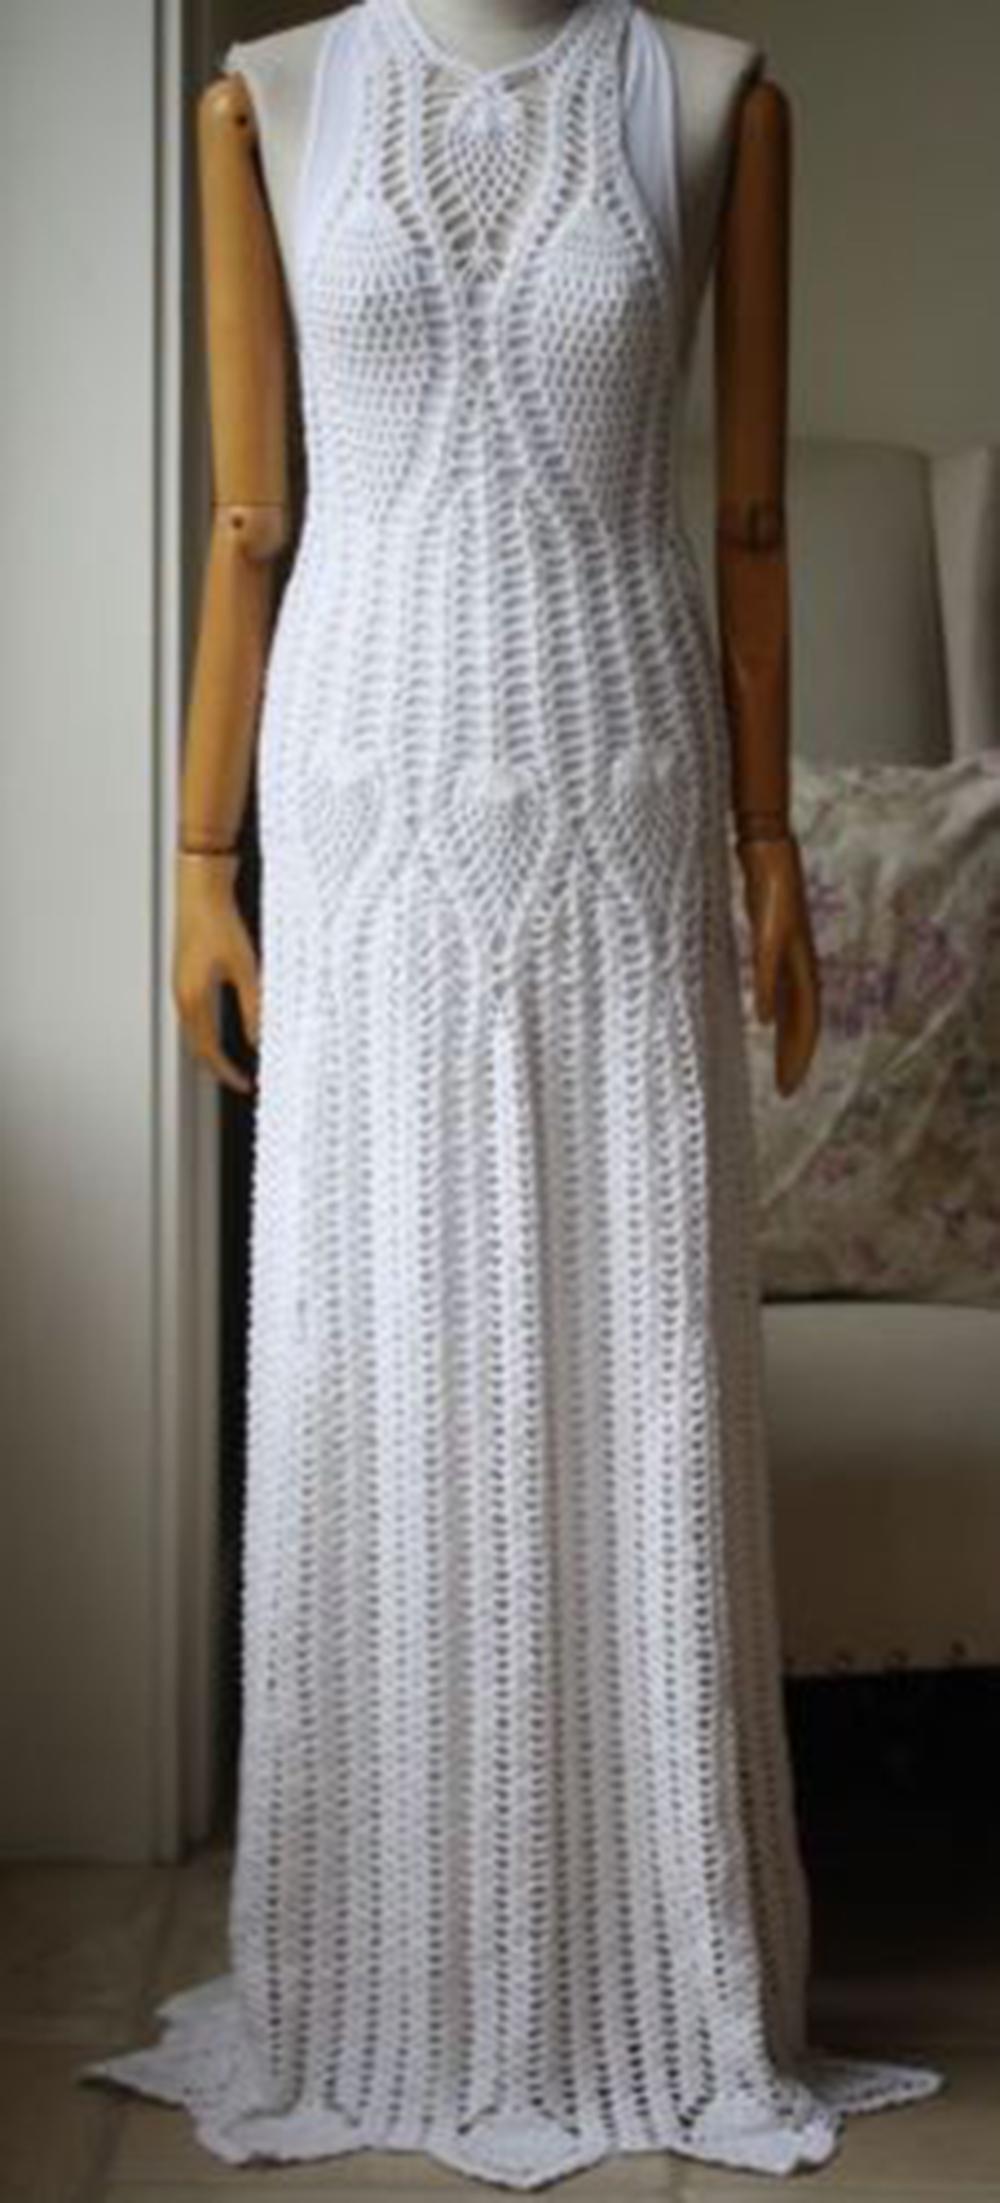 Inspired by a trip to Sayulita, Mexico, Rosetta Getty's ivory dress captures the spirit of youthfulness and travel. This floor-length style is hand-crocheted from glossy cotton-blend and includes a slip for coverage. Ivory crocheted cotton-blend.